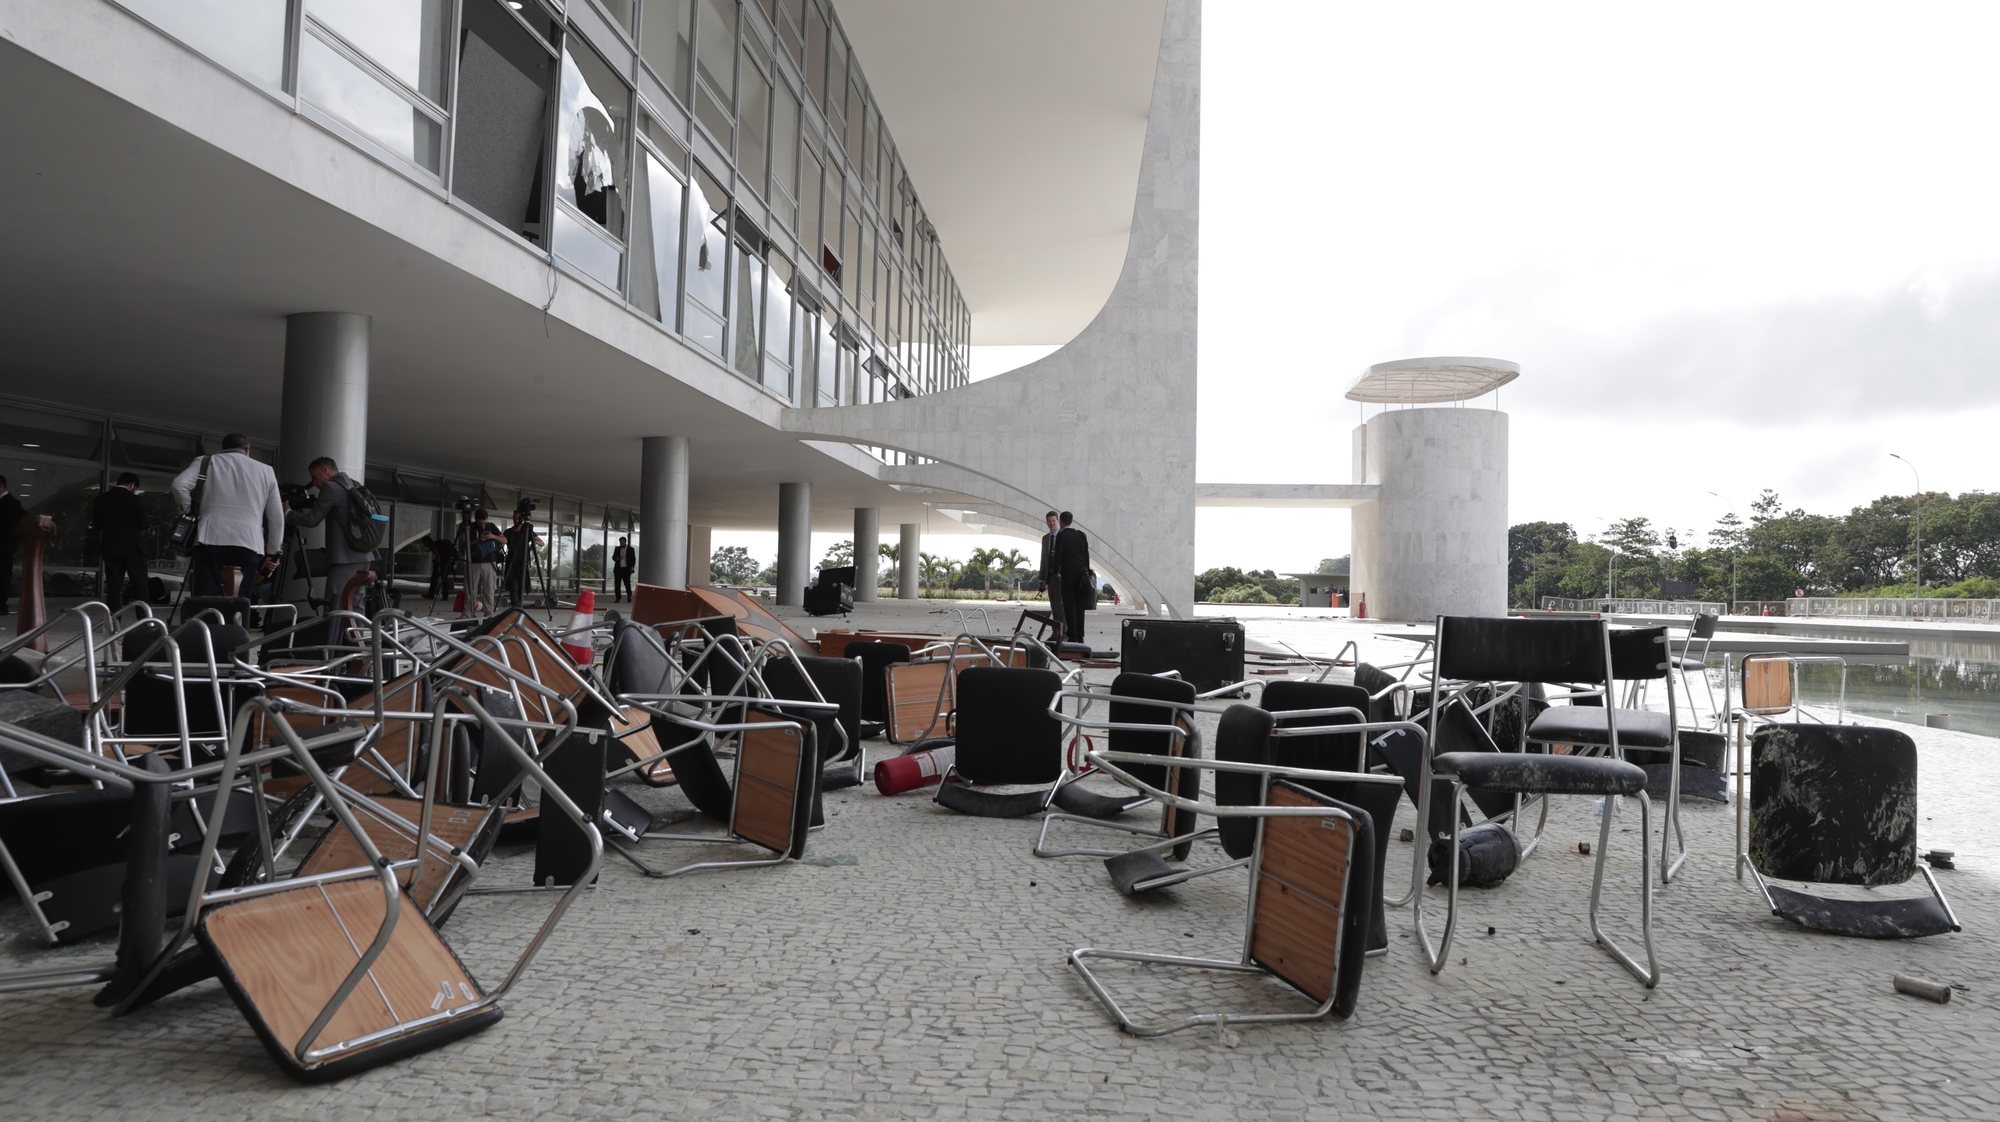 epa10396800 Officials inspect the damage to the Planalto Palace after Bolsonaro supporters took over the Plaza de los Tres Poderes (Square of the Three Powers) to invade government buildings, in Brasilia, Brazil, 09 January 2023. Hundreds of supporters of former Brazilian President Jair Bolsonaro on 08 January invaded the headquarters of the National Congress, and also Supreme Court and the Planalto Palace, seat of the Presidency of the Republic, in a demonstration calling for a military intervention to overthrow President Luiz Inacio Lula da Silva. The crowd broke through the cordons of security forces and forced their way to the roof of the buildings of the Chamber of Deputies and the Senate, and some entered inside the legislative headquarters. So far, authorities detained some people involved in the violent acts which were widely condemned by all Brazilian institutions and by the international community.  EPA/ANDRE COELHO